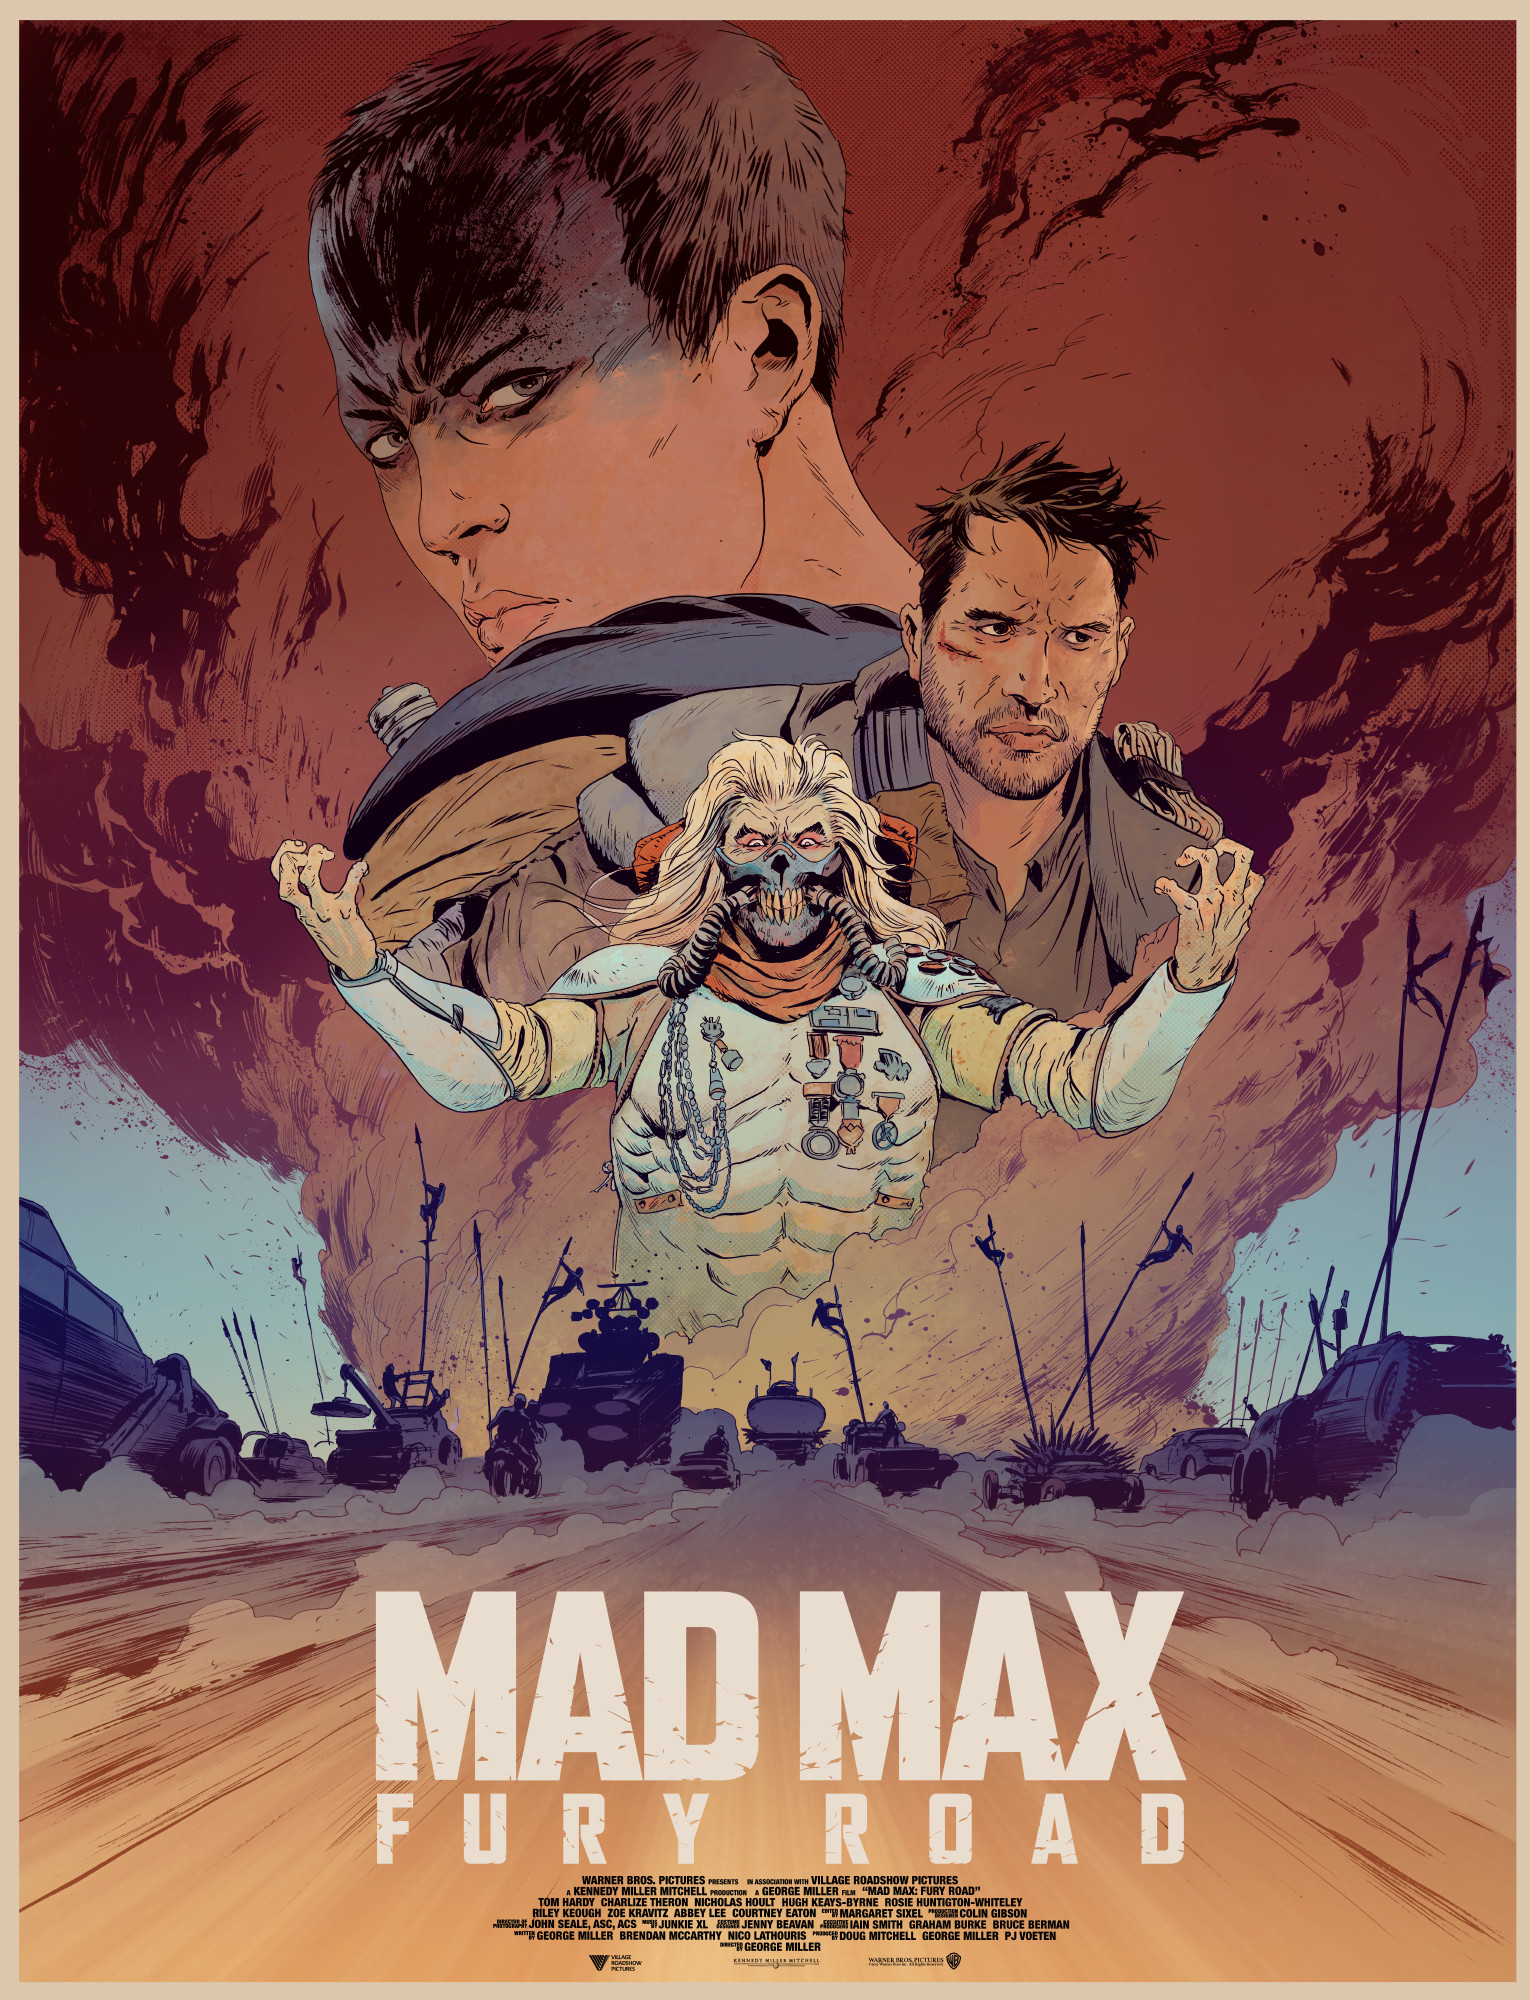 MAD MAX FURY ROAD Art Poster Grand format A0 Large Print